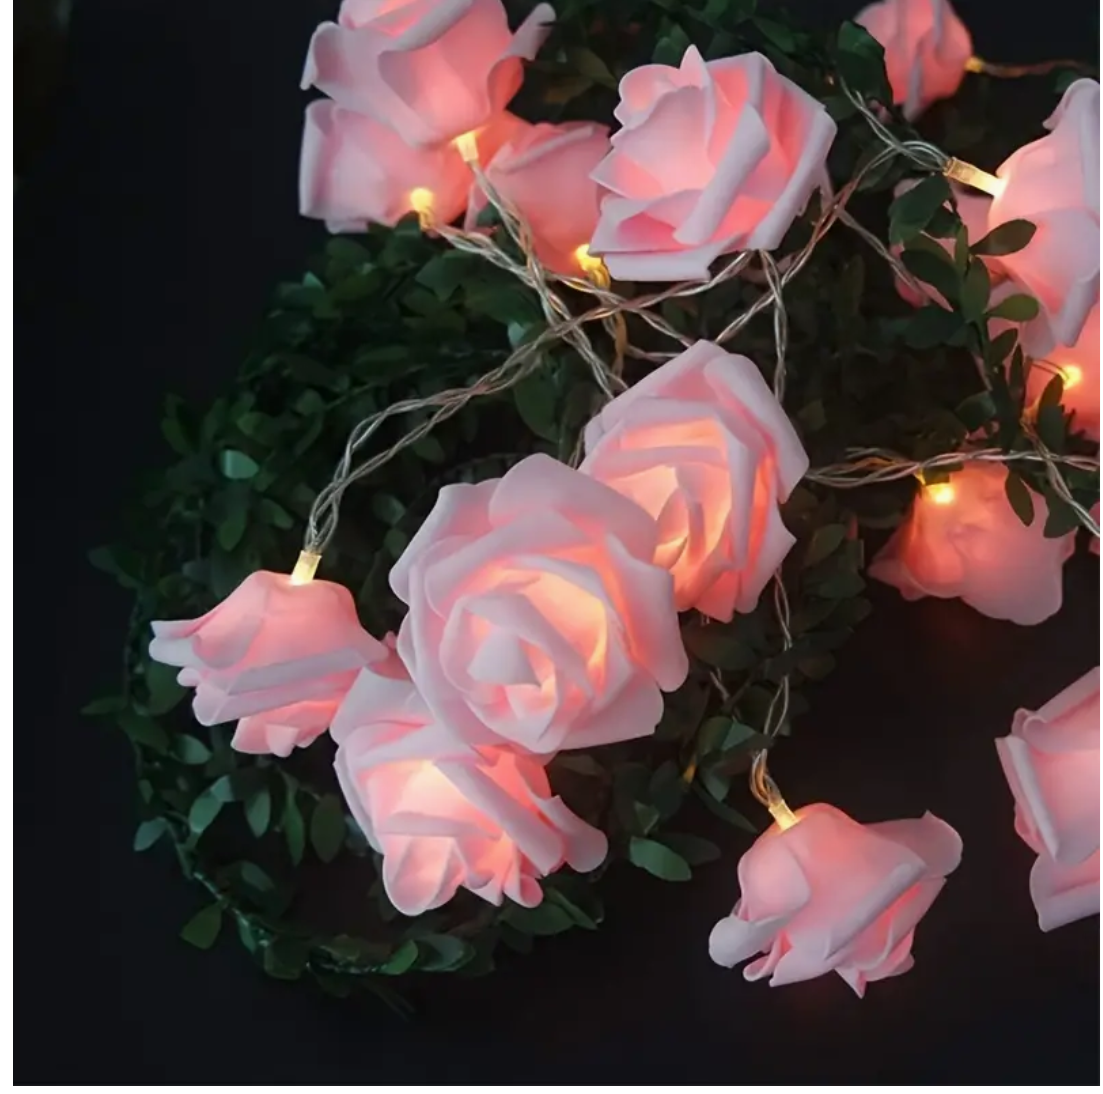 Glowing Romance: LED Rose String Lights for Magical Moments - Perfect for Valentine's Day, Weddings, and Year-Round Celebrations!